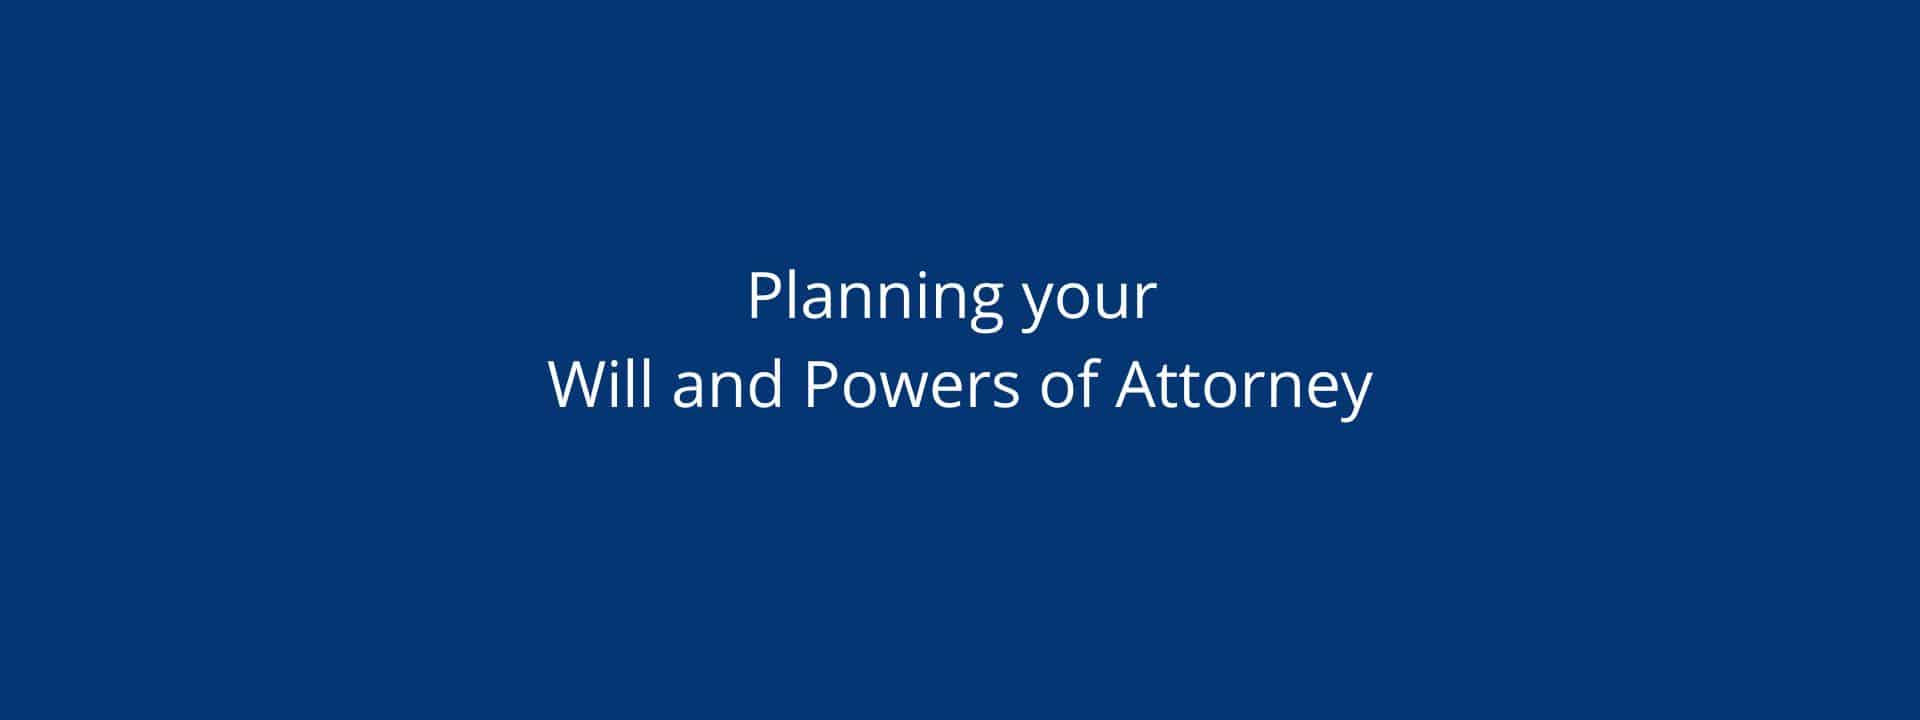 Will and Power of Attorney planning